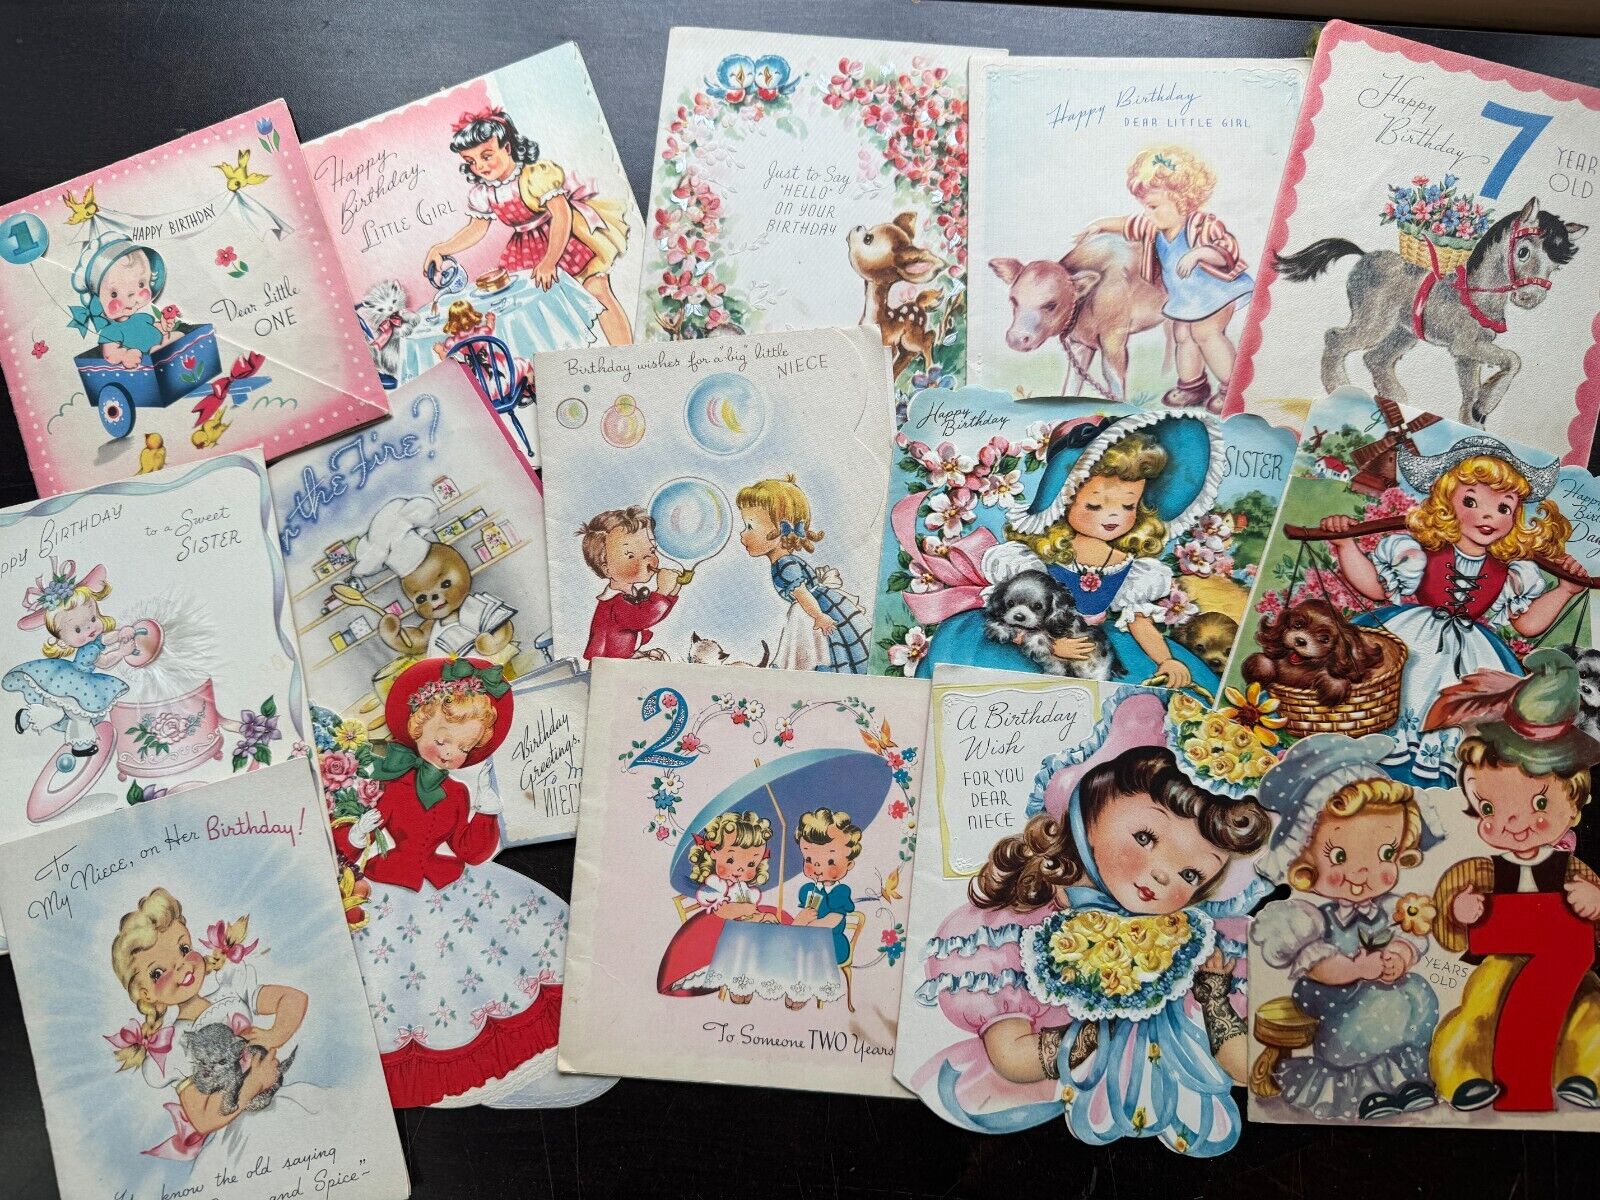 Lot of 70 Vintage 1940s/1950s Child's Birthday Cards - Adorable Artwork